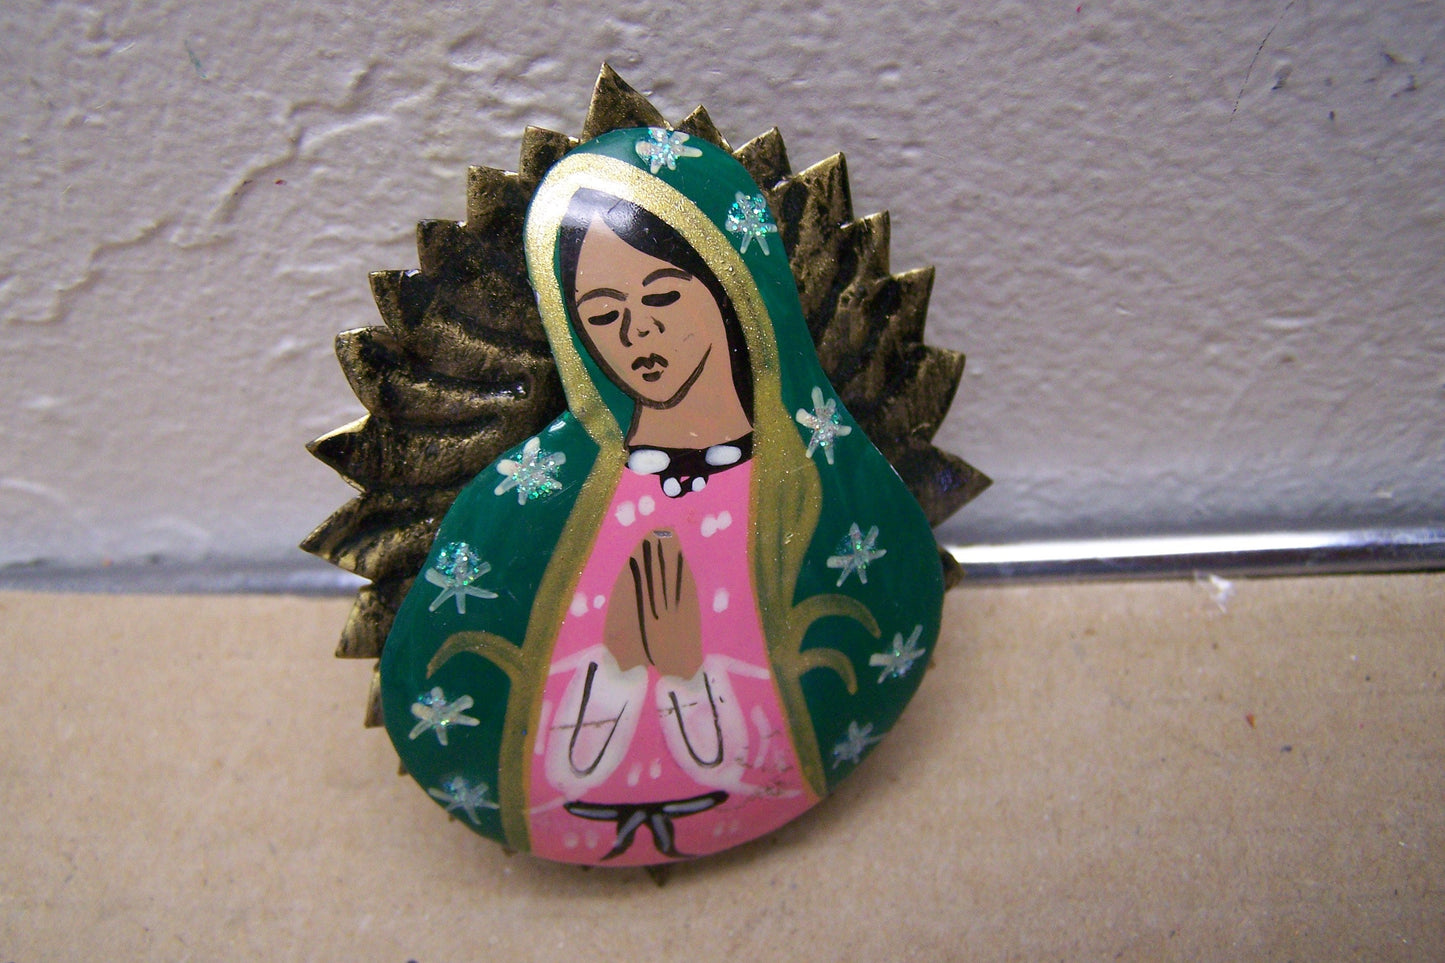 Painted 3D Virgin of Guadalupe - Refrigerator Magnet